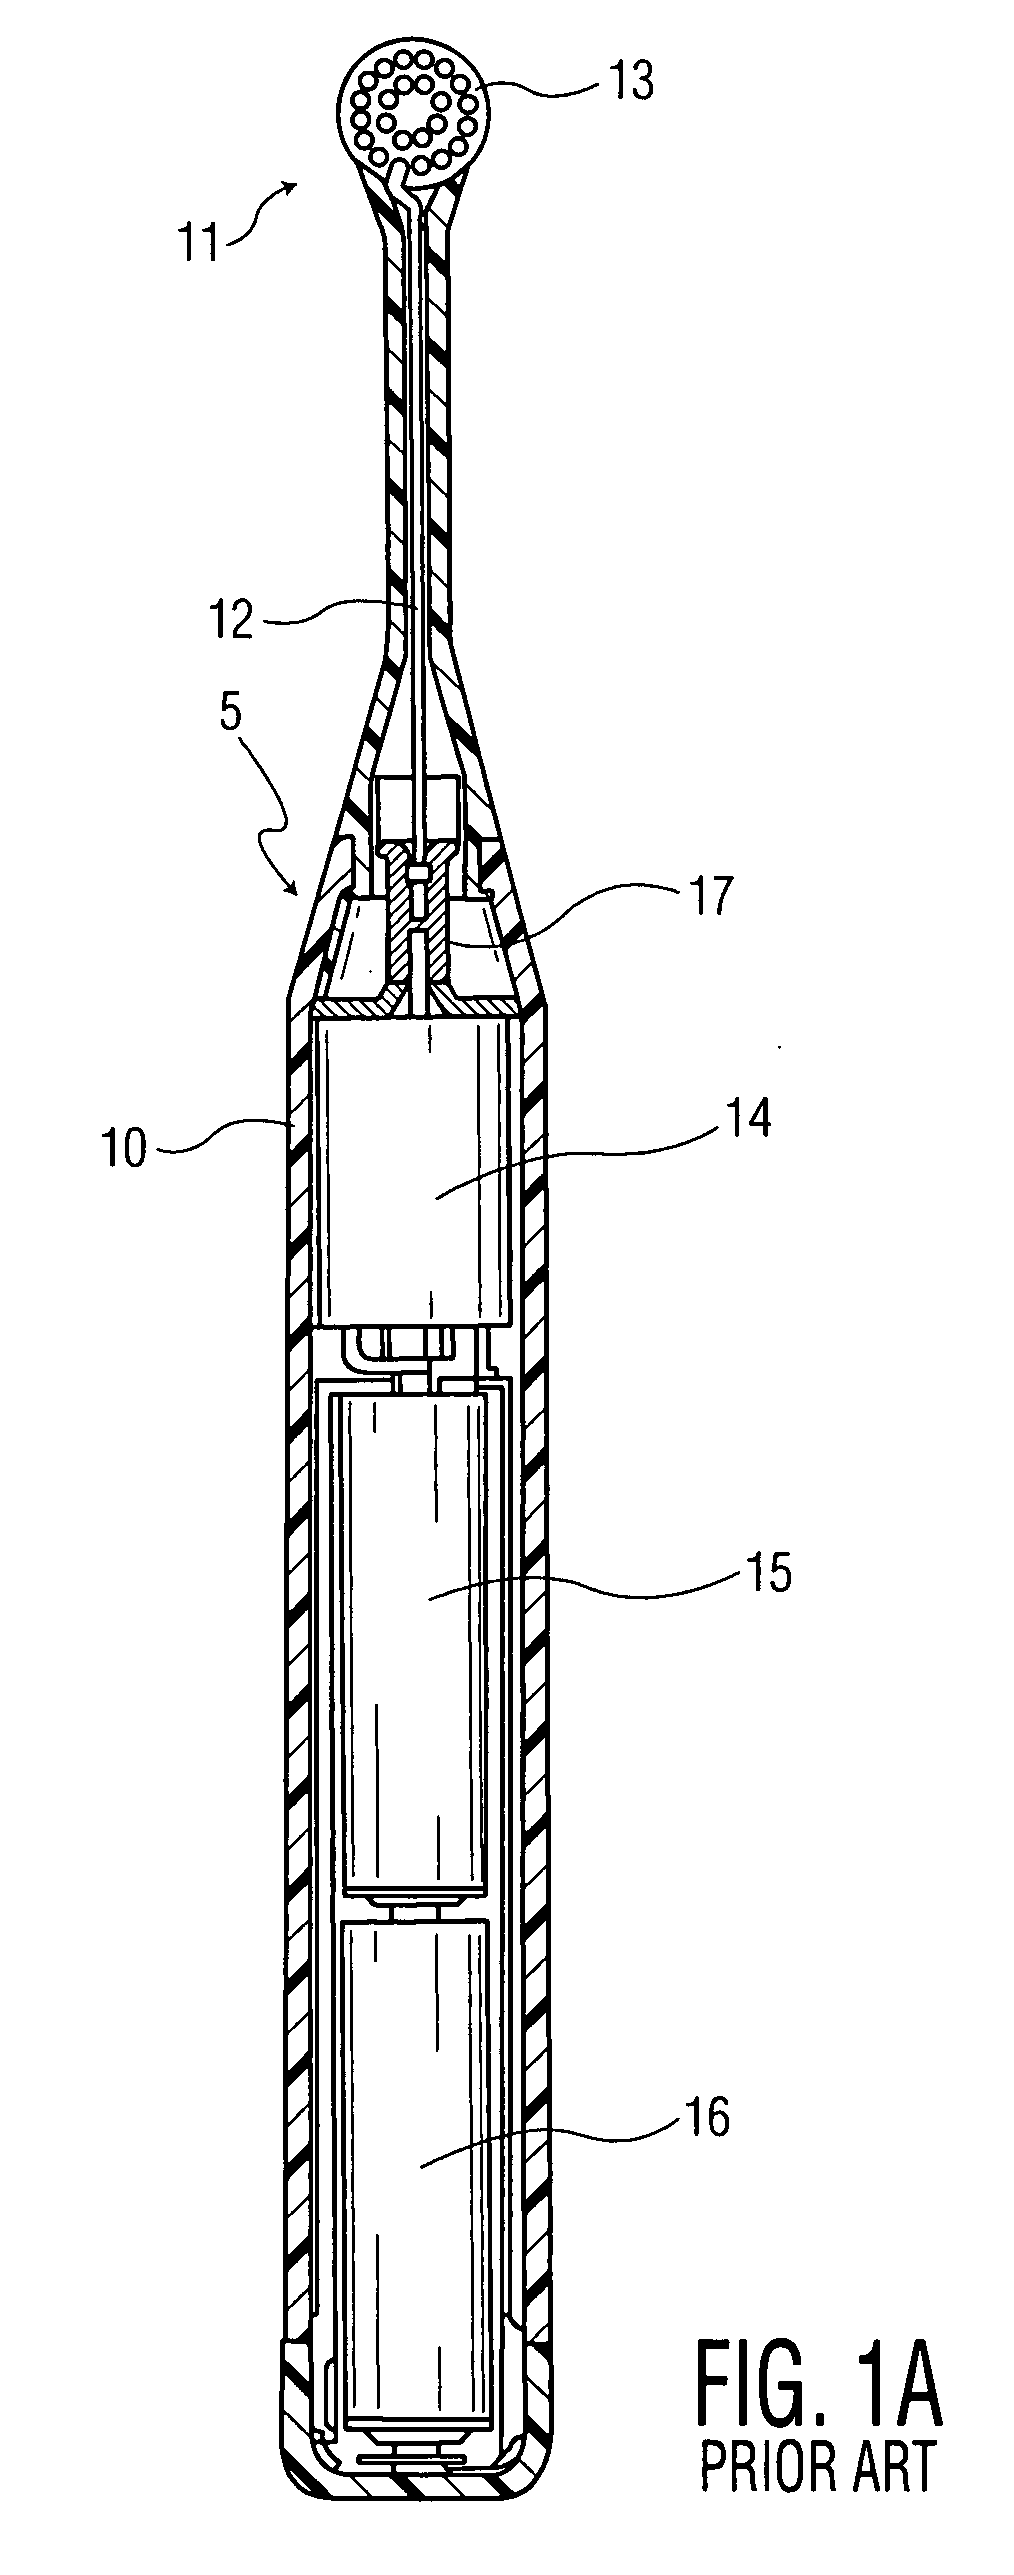 Toothbrush with movable head sections for enhanced oral care